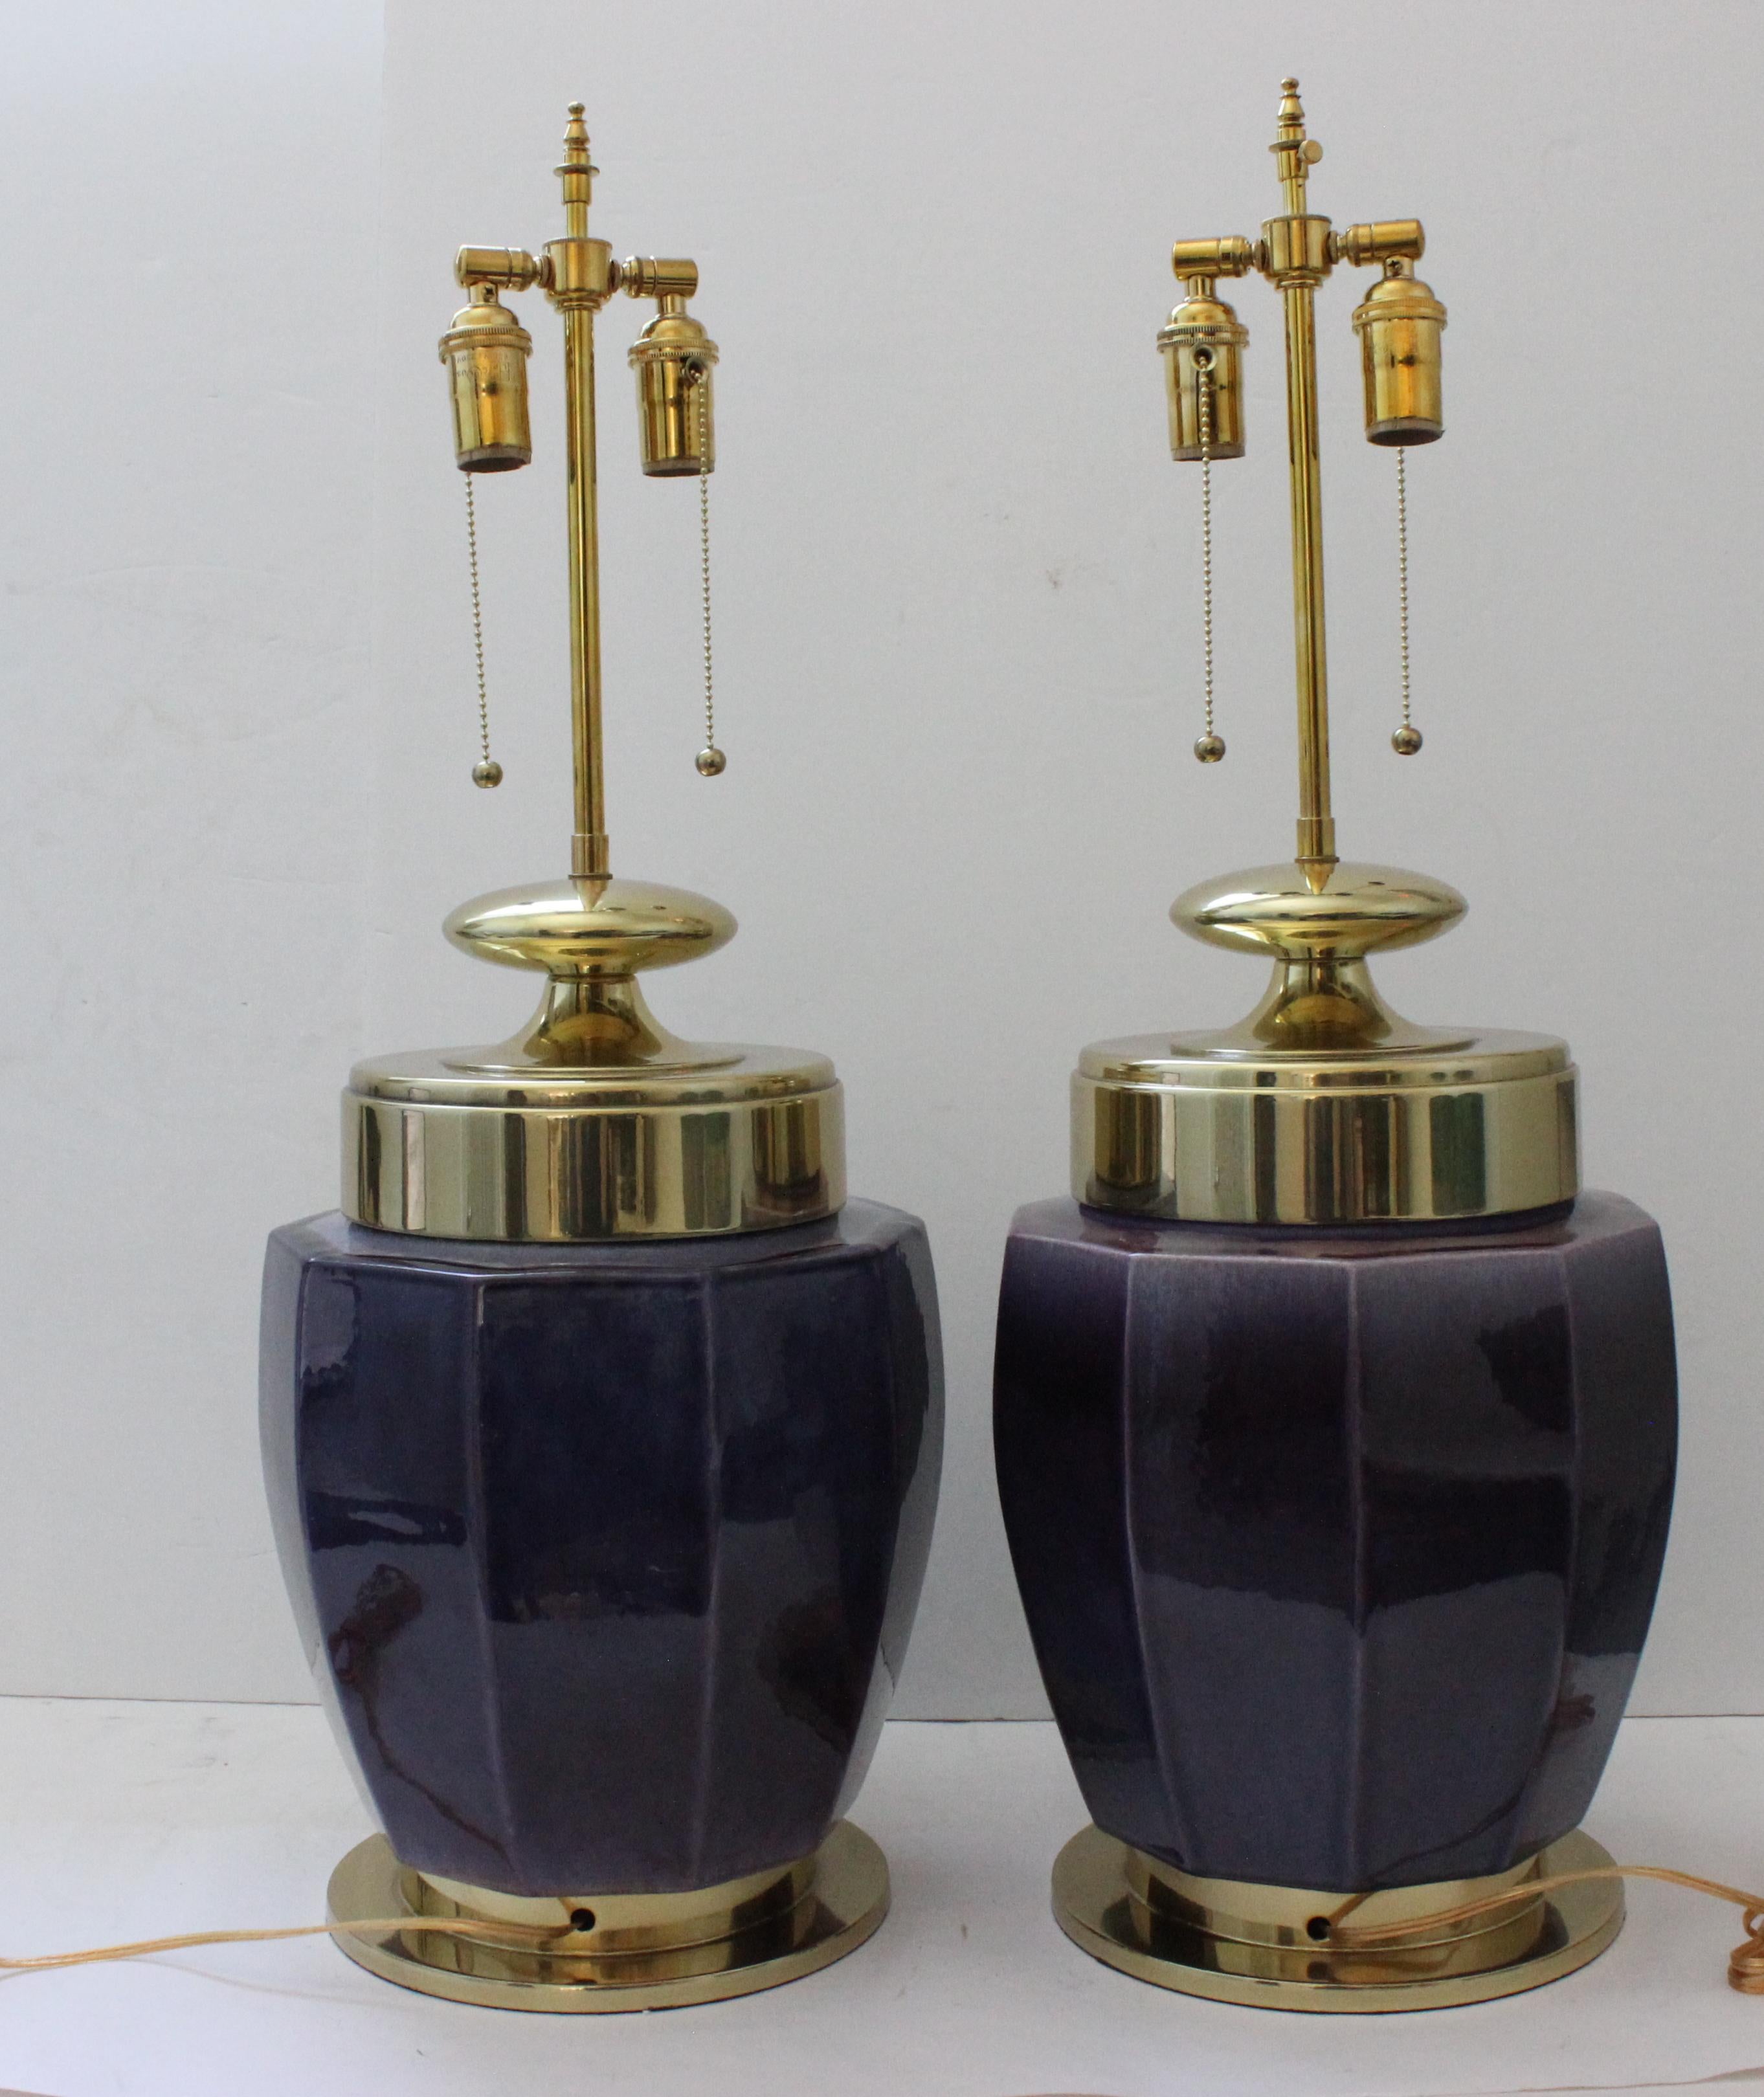 Porcelain Pair of Aubergine Glazed Lamps by Stiffel